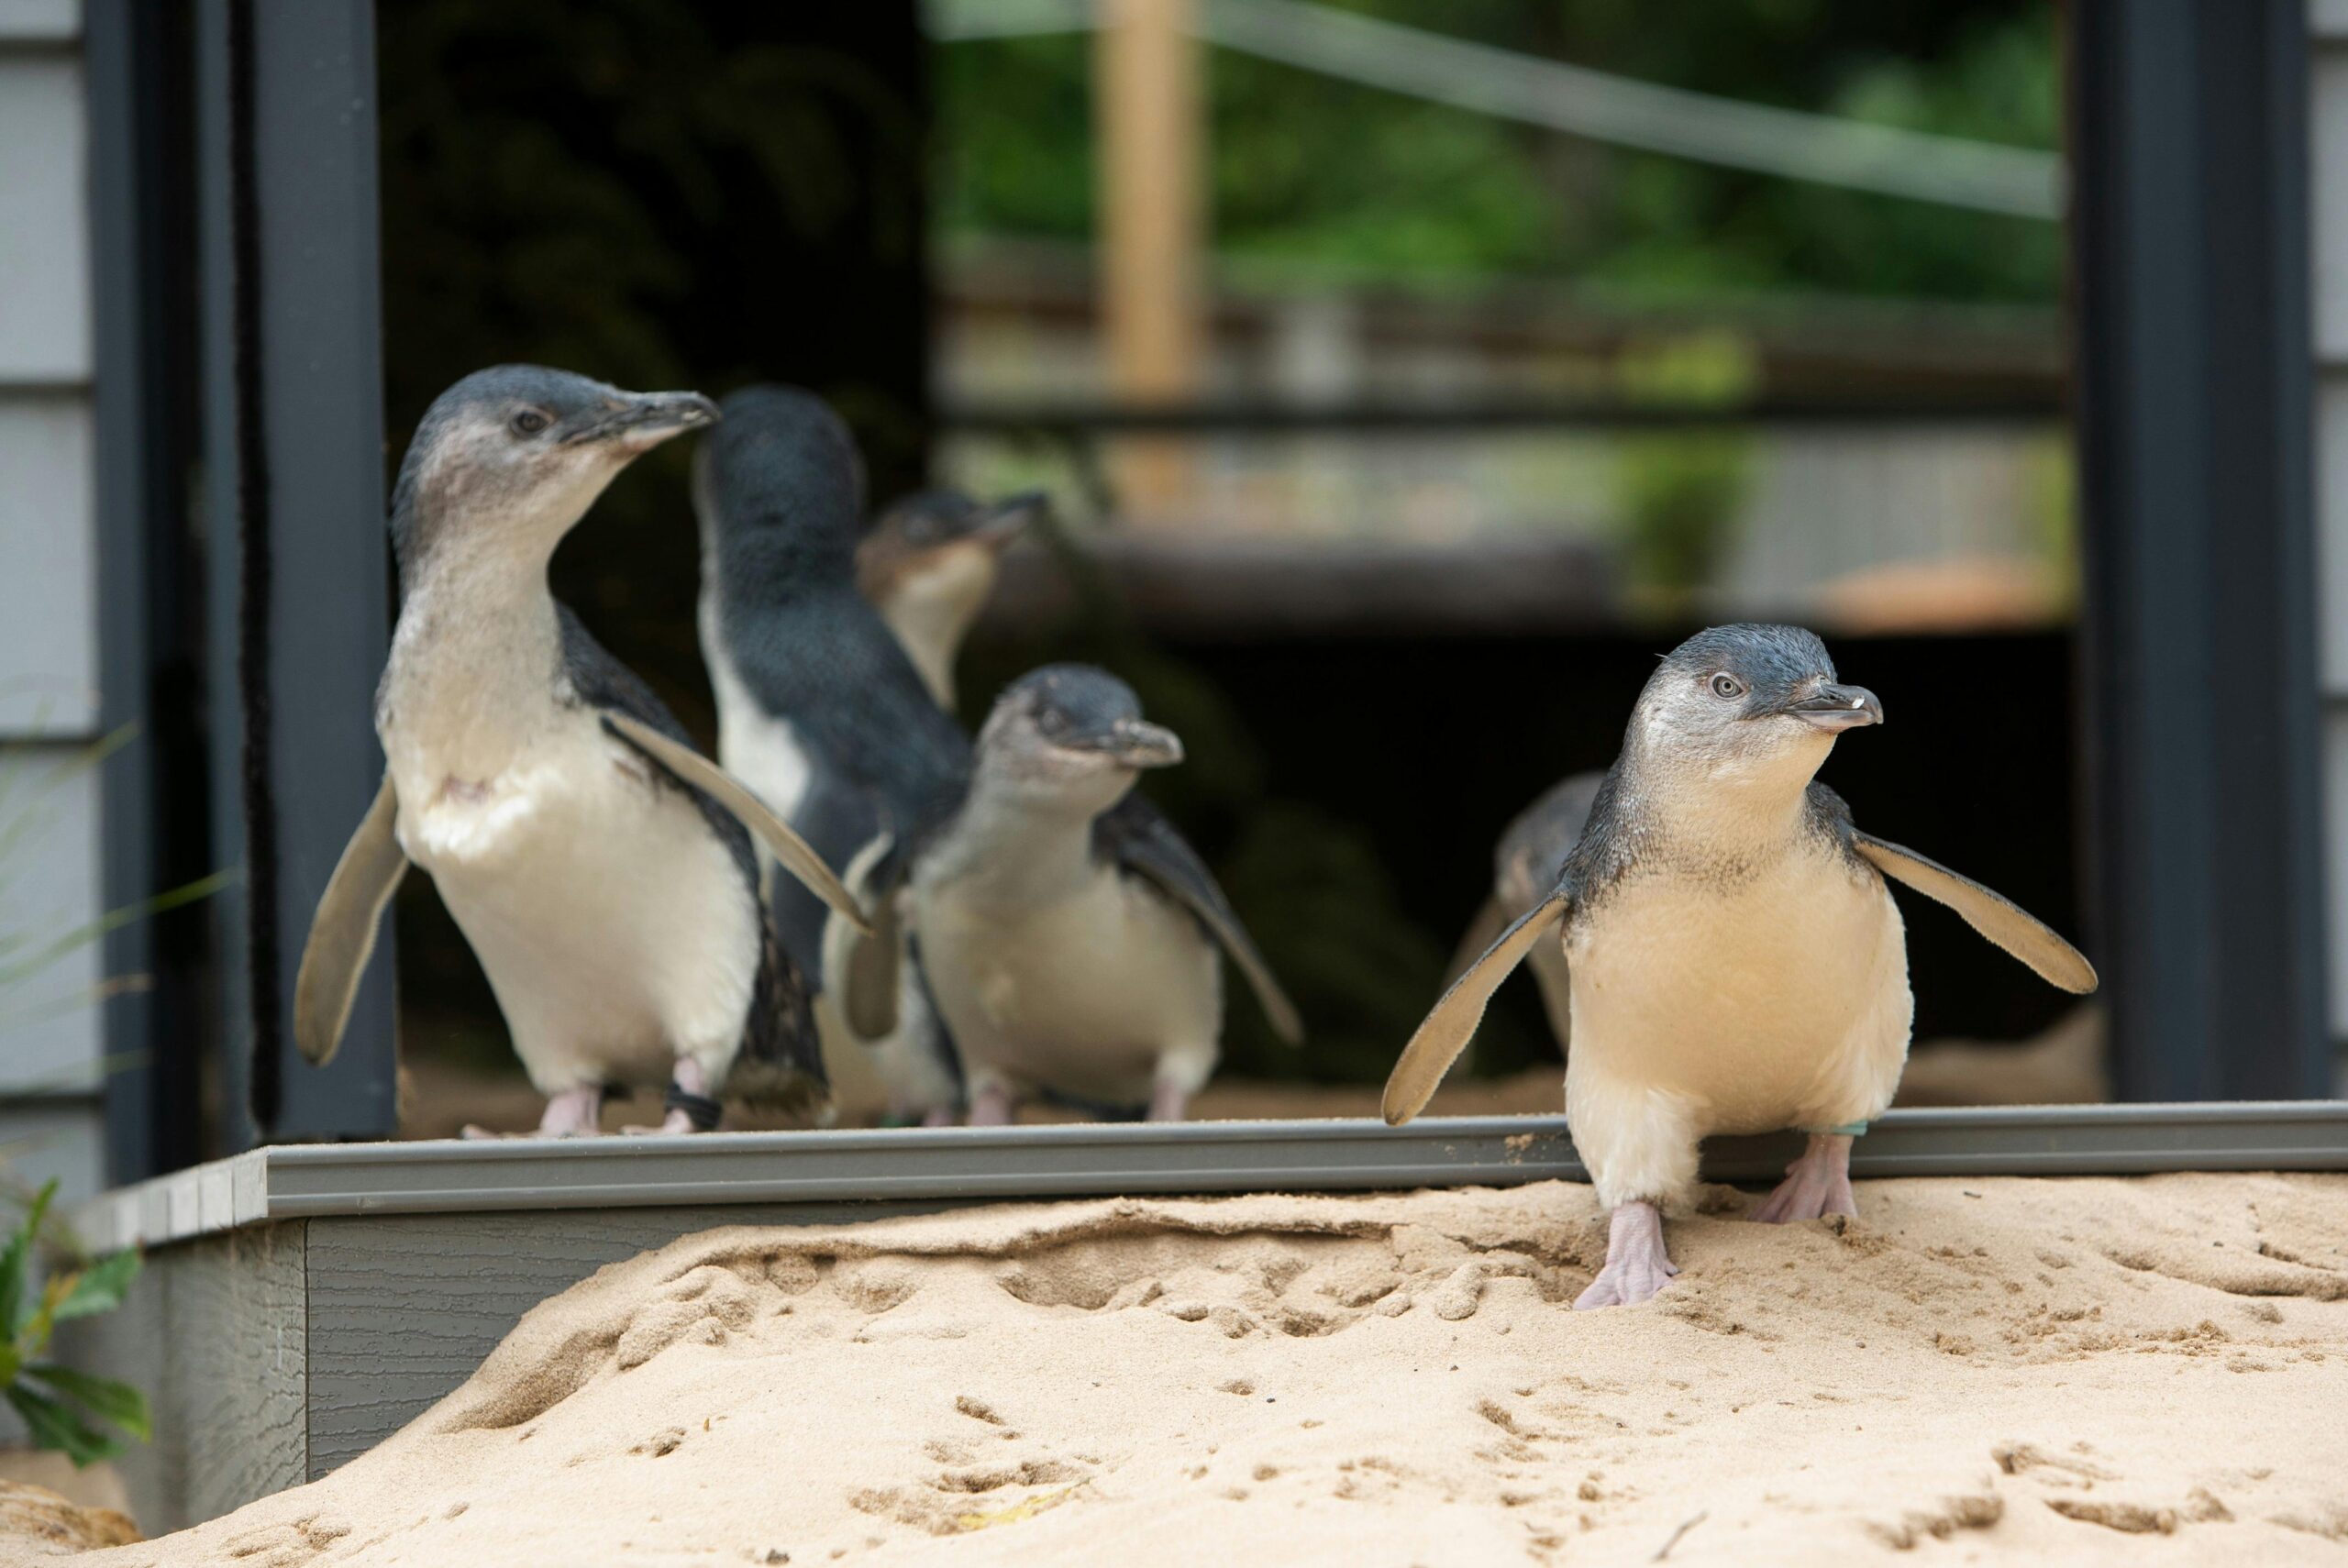 Meet our little penguin family and watch them swim in the underwater viewing area